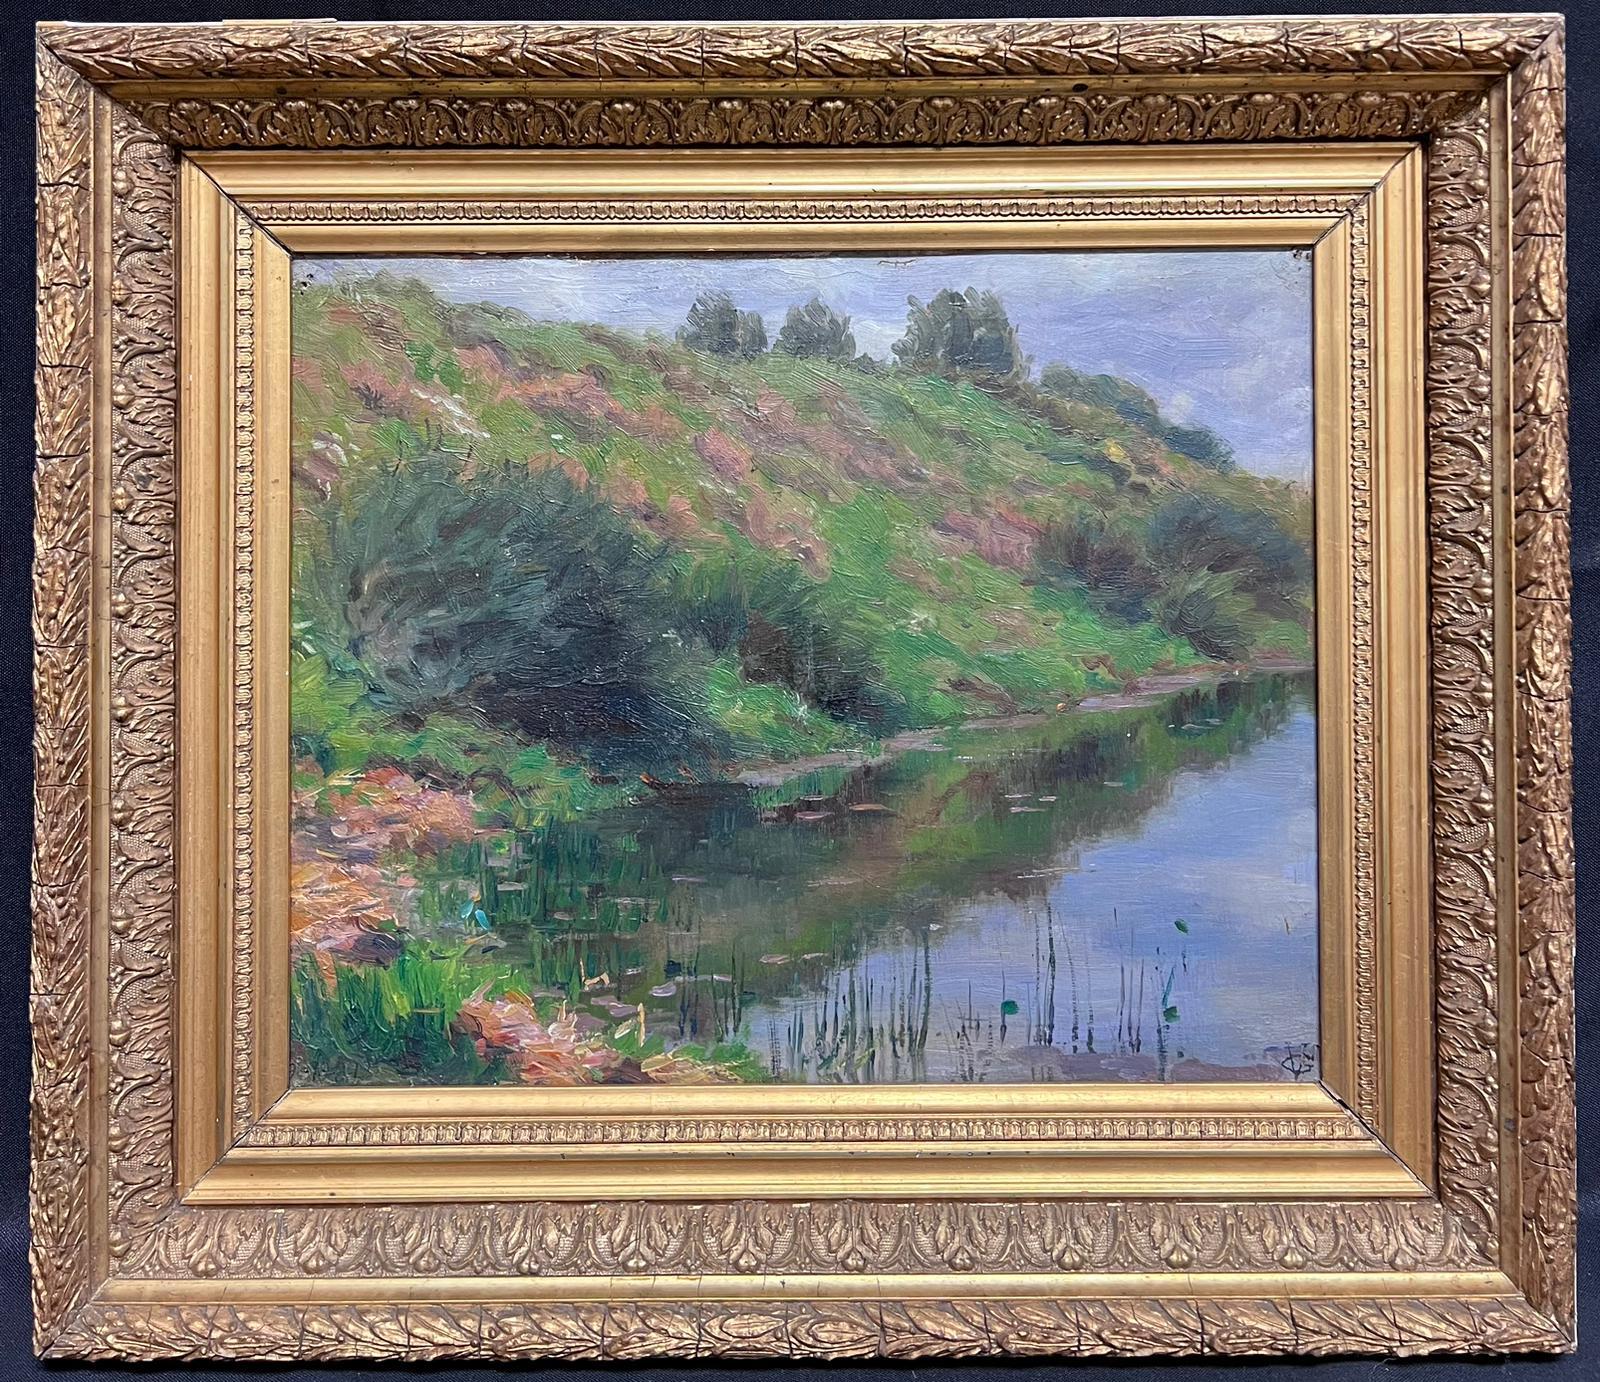 Tranquil River Landscape
French Impressionist School, antique
signed with monogram lower corner
oil on canvas, framed in antique Gil frame
framed: 16.5 x 19 inches
canvas : 11.5 x 14 inches
provenance: private collection, France
condition: very good